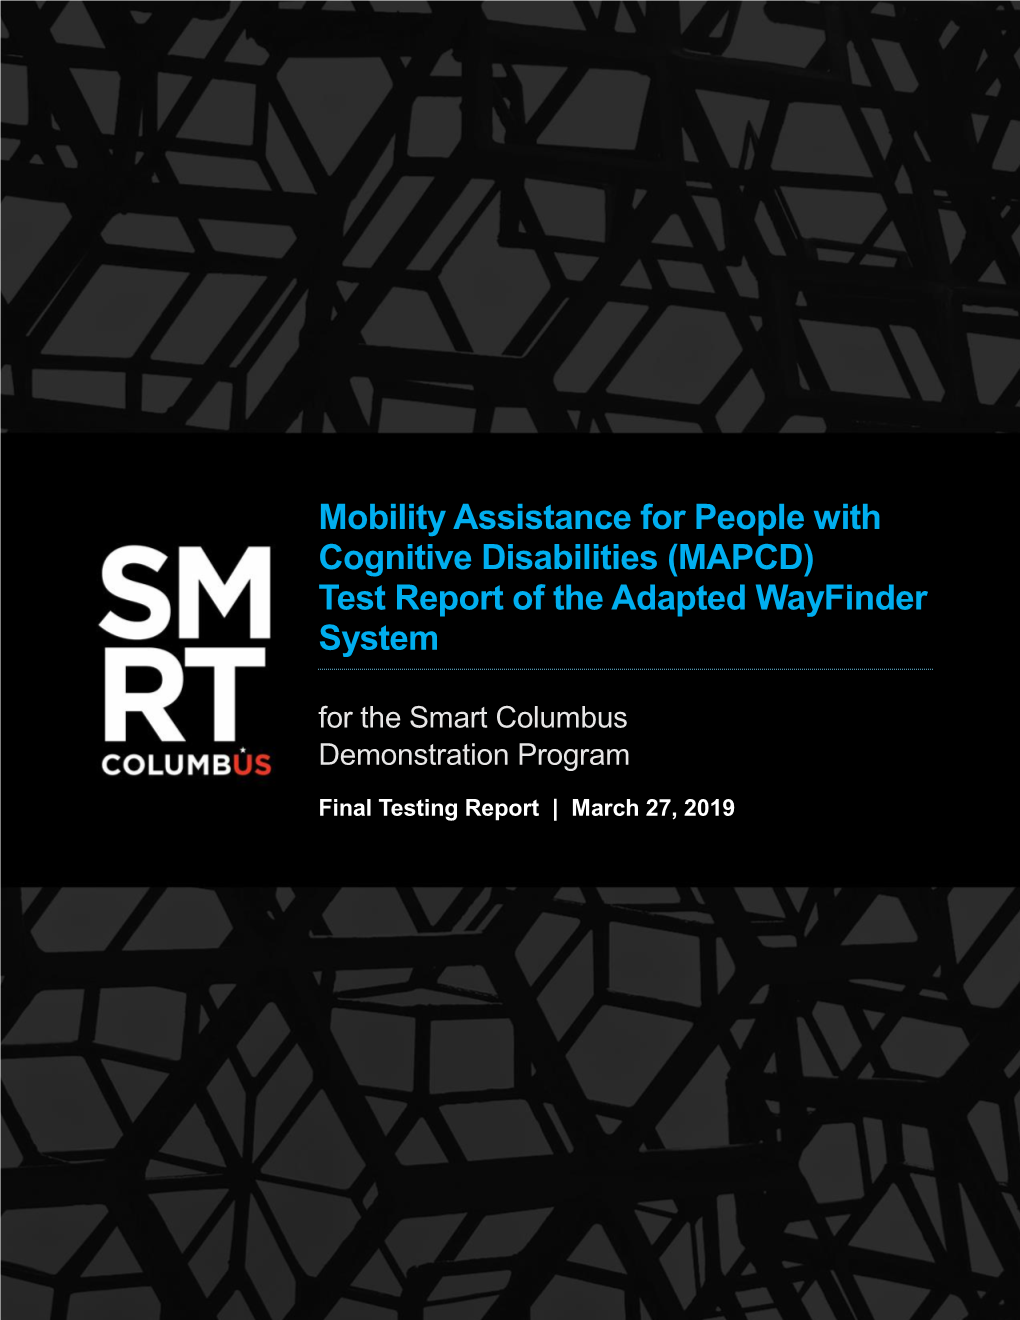 Smart Columbus Mobility Assistance for People with Cognitive